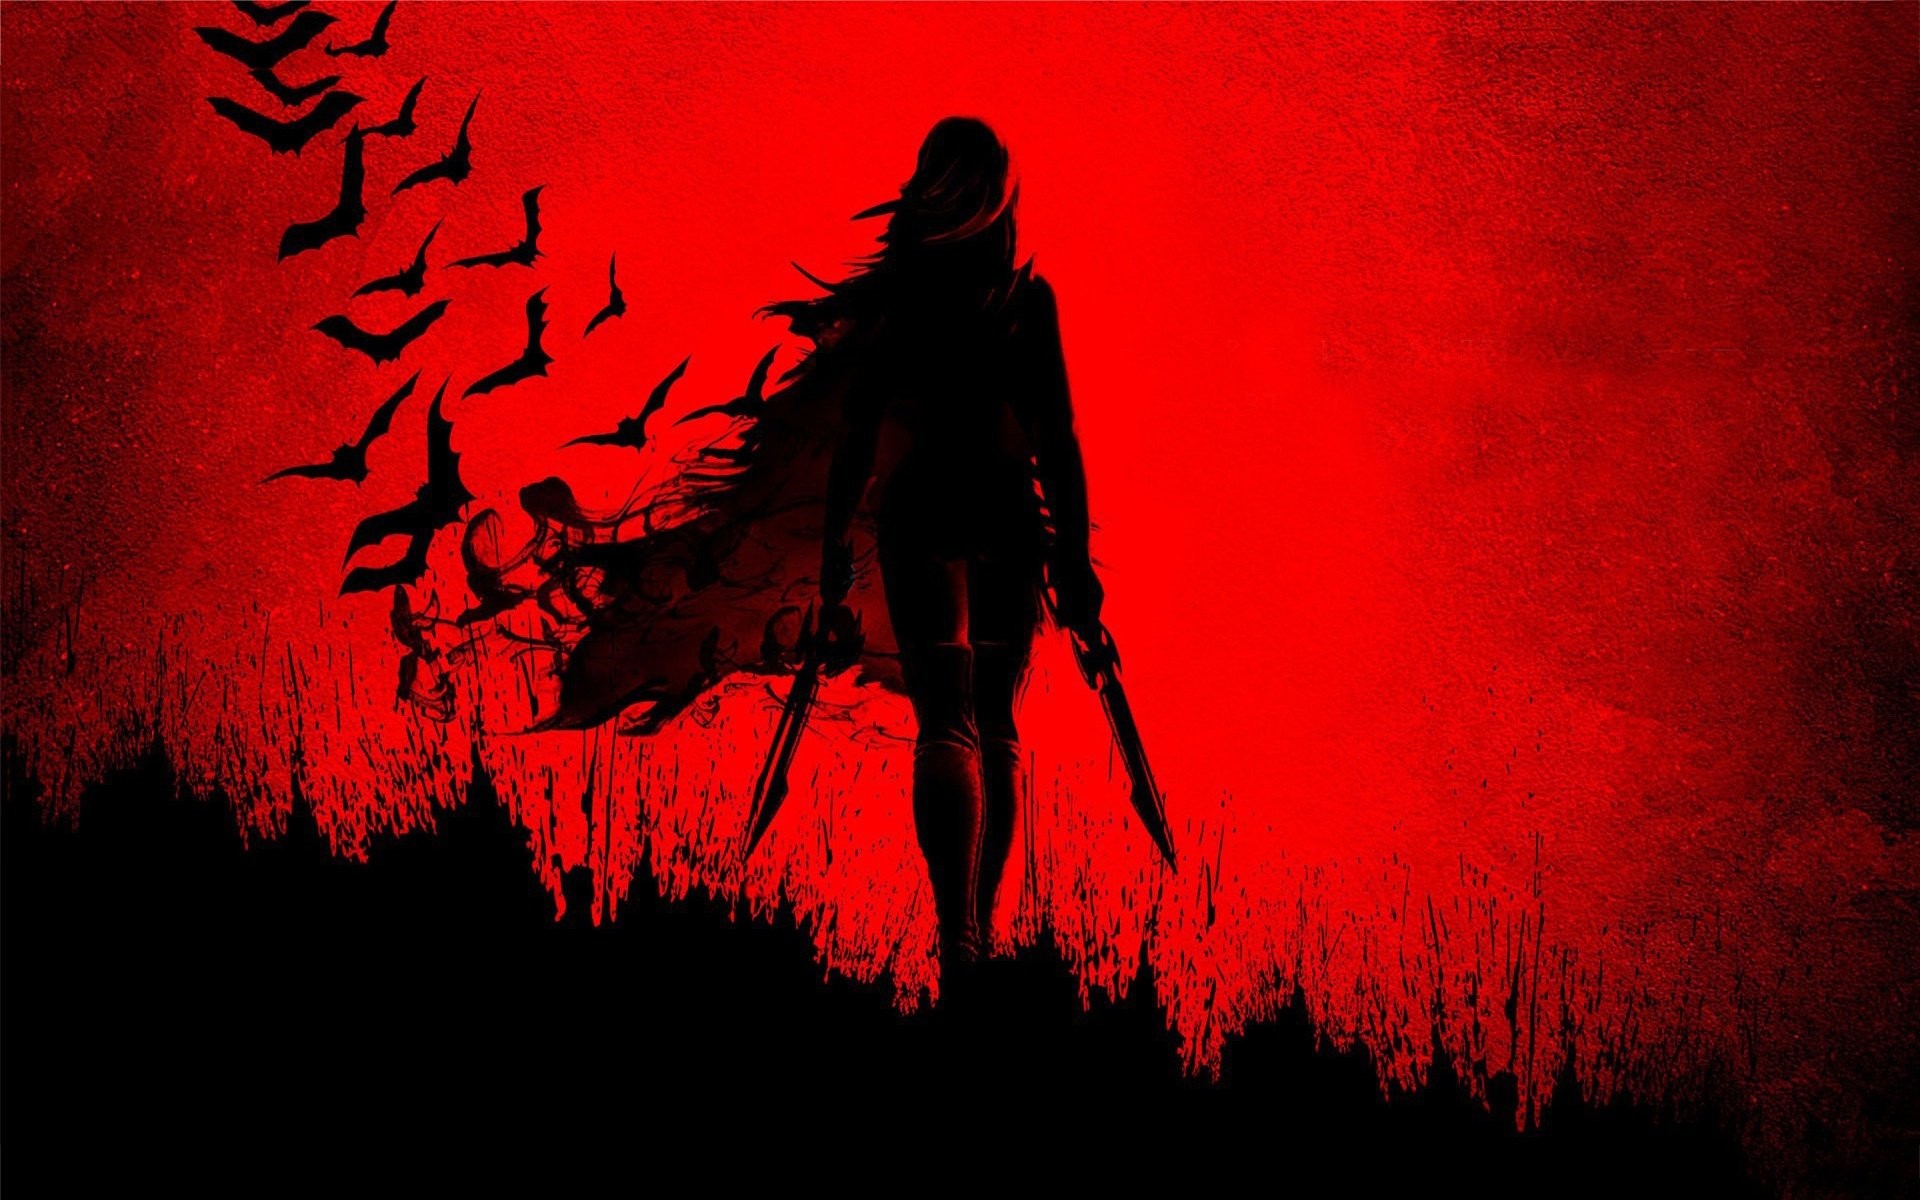 Blade-girl-shadow-wide-red sword anime wallpaper | | 683479 |  WallpaperUP